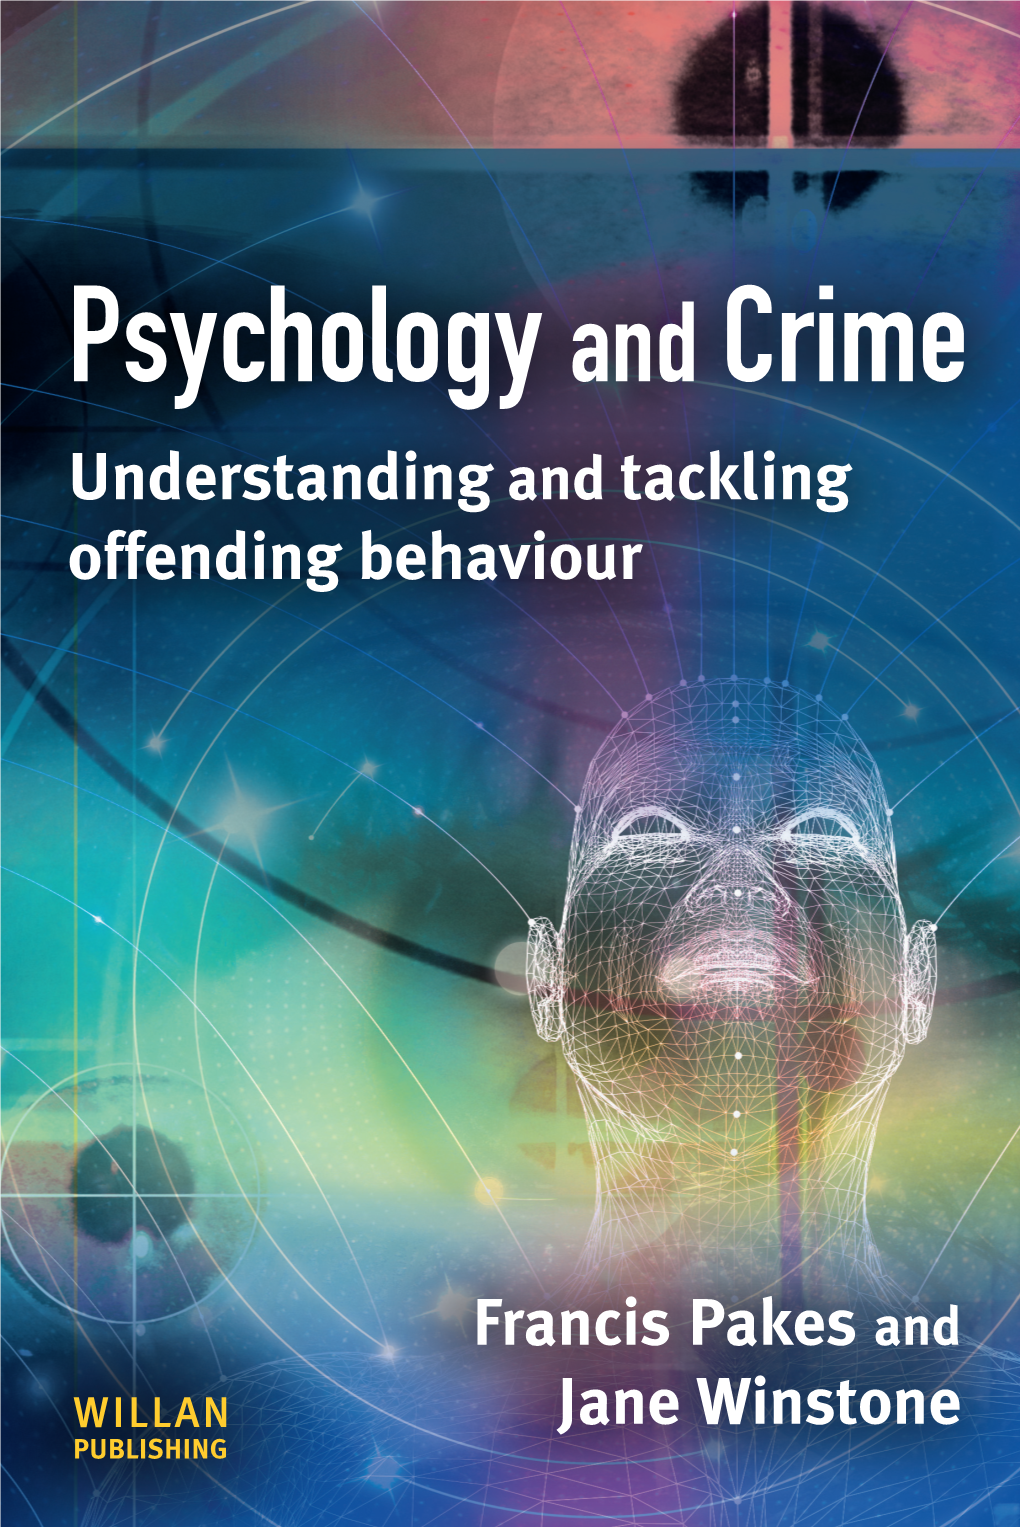 Psychology and Crime Understanding and Tackling Offending Behaviour Francis Pakes and Jane Winstone